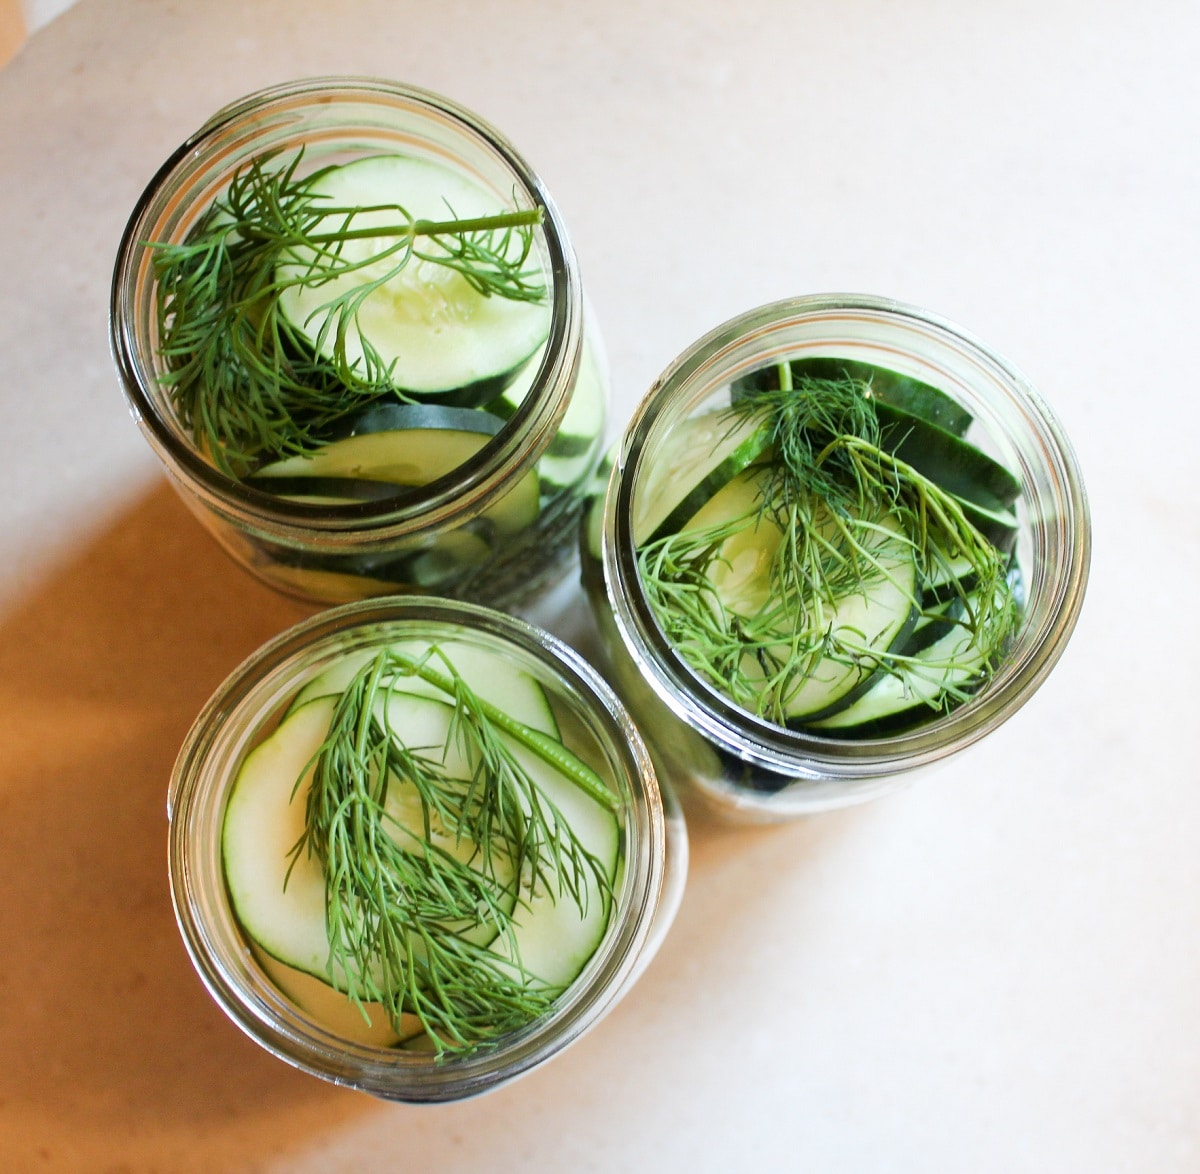 sliced easy refrigerator dill pickles in an unsealed glass jar